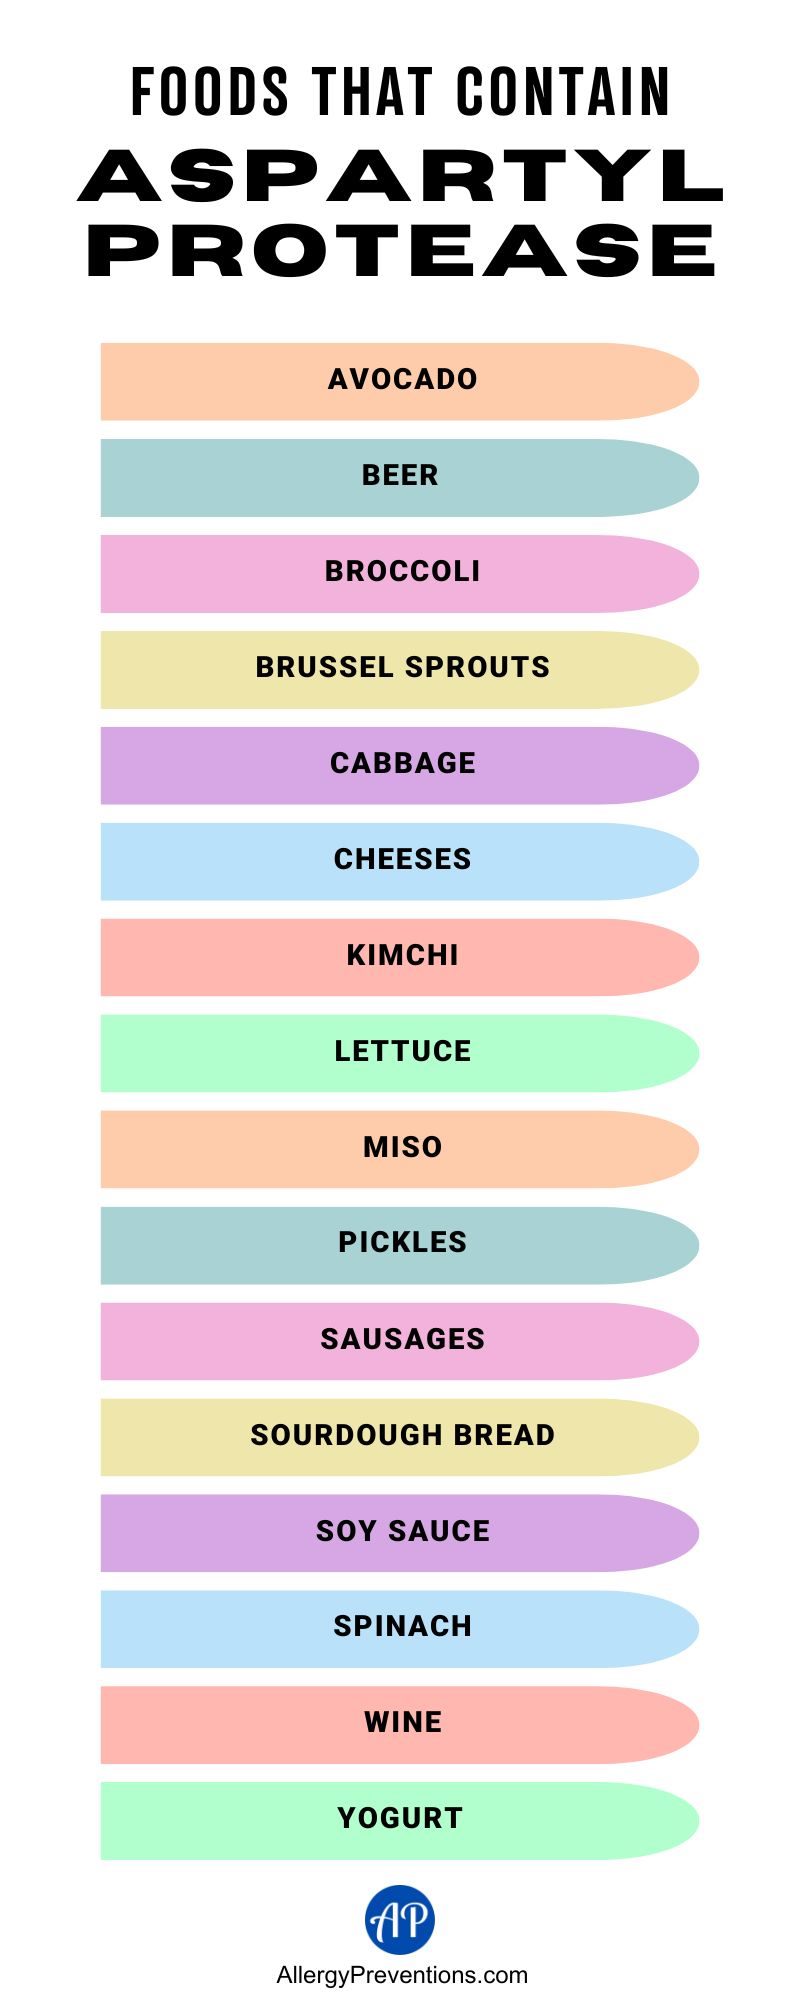 Foods that contain aspartyl protease infographic. Avocado, beer, broccoli, Brussel sprouts, cabbage, cheeses, kimchi, lettuce, miso, pickles, sausages, sourdough bread, soy sauce, spinach, wine, and yogurt.